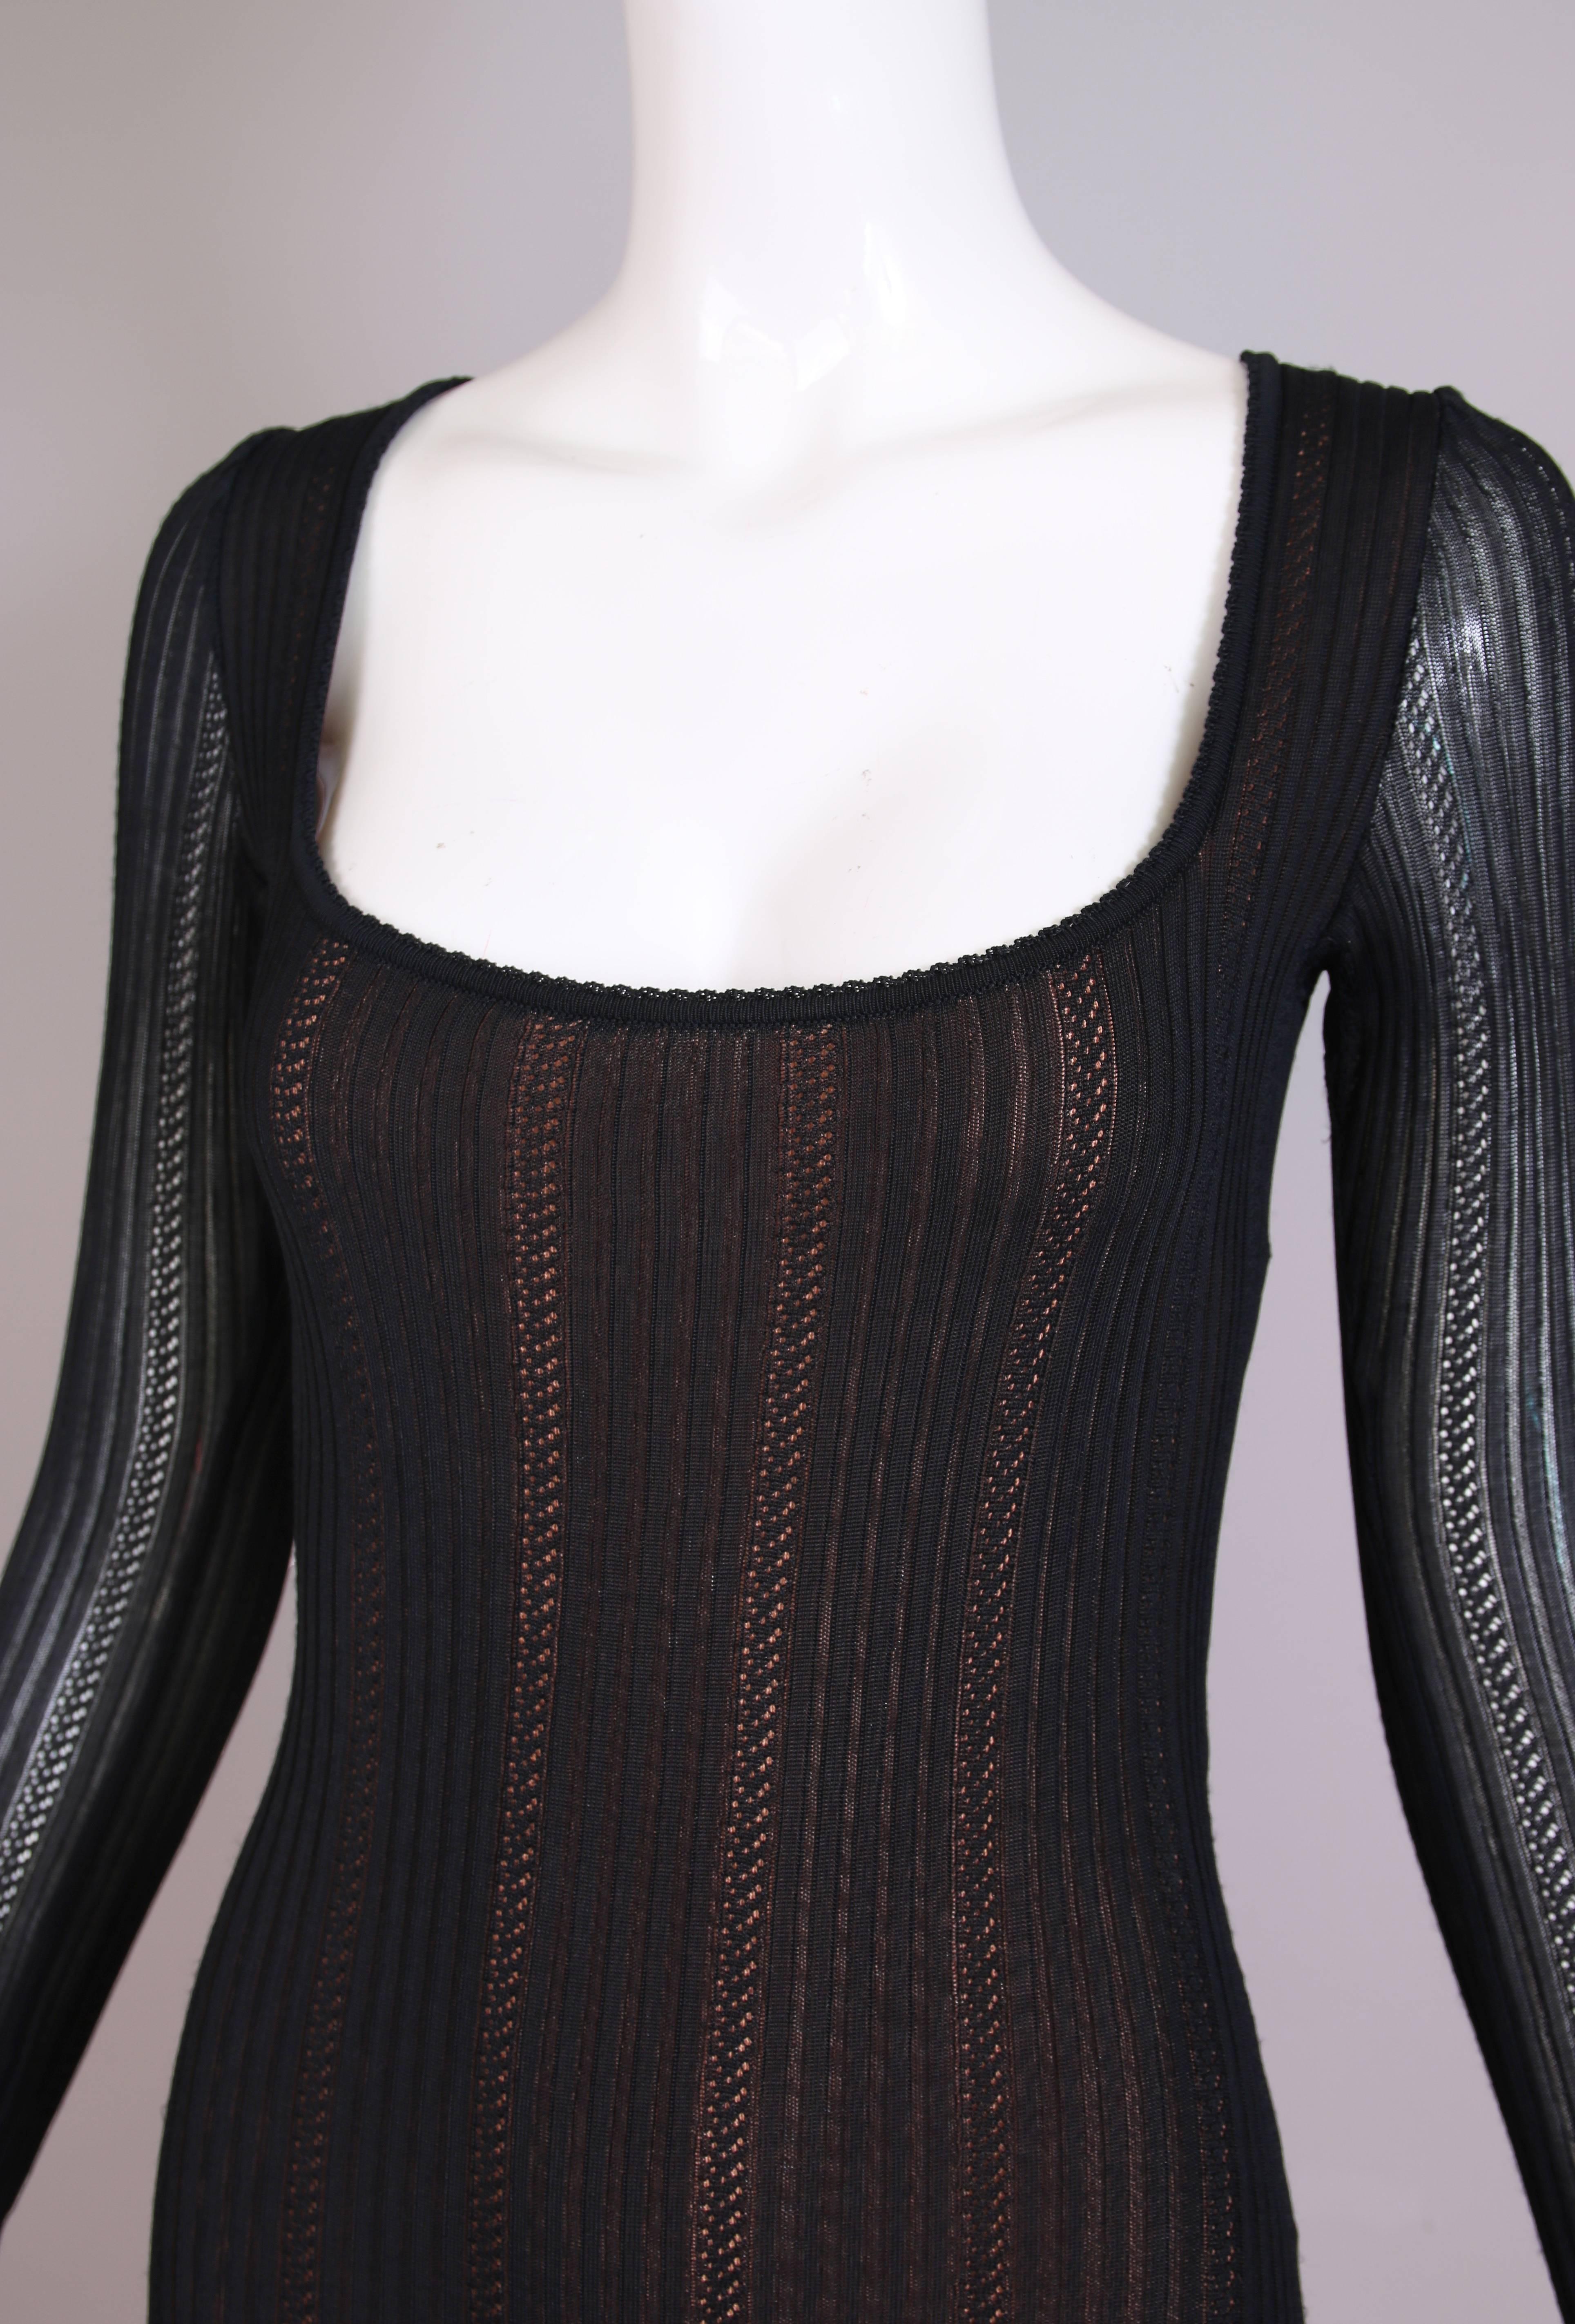 Alaia Black Sheer Stretch Viscose Long Sleeved Mini Dress W/Flounced Hem In Excellent Condition For Sale In Studio City, CA